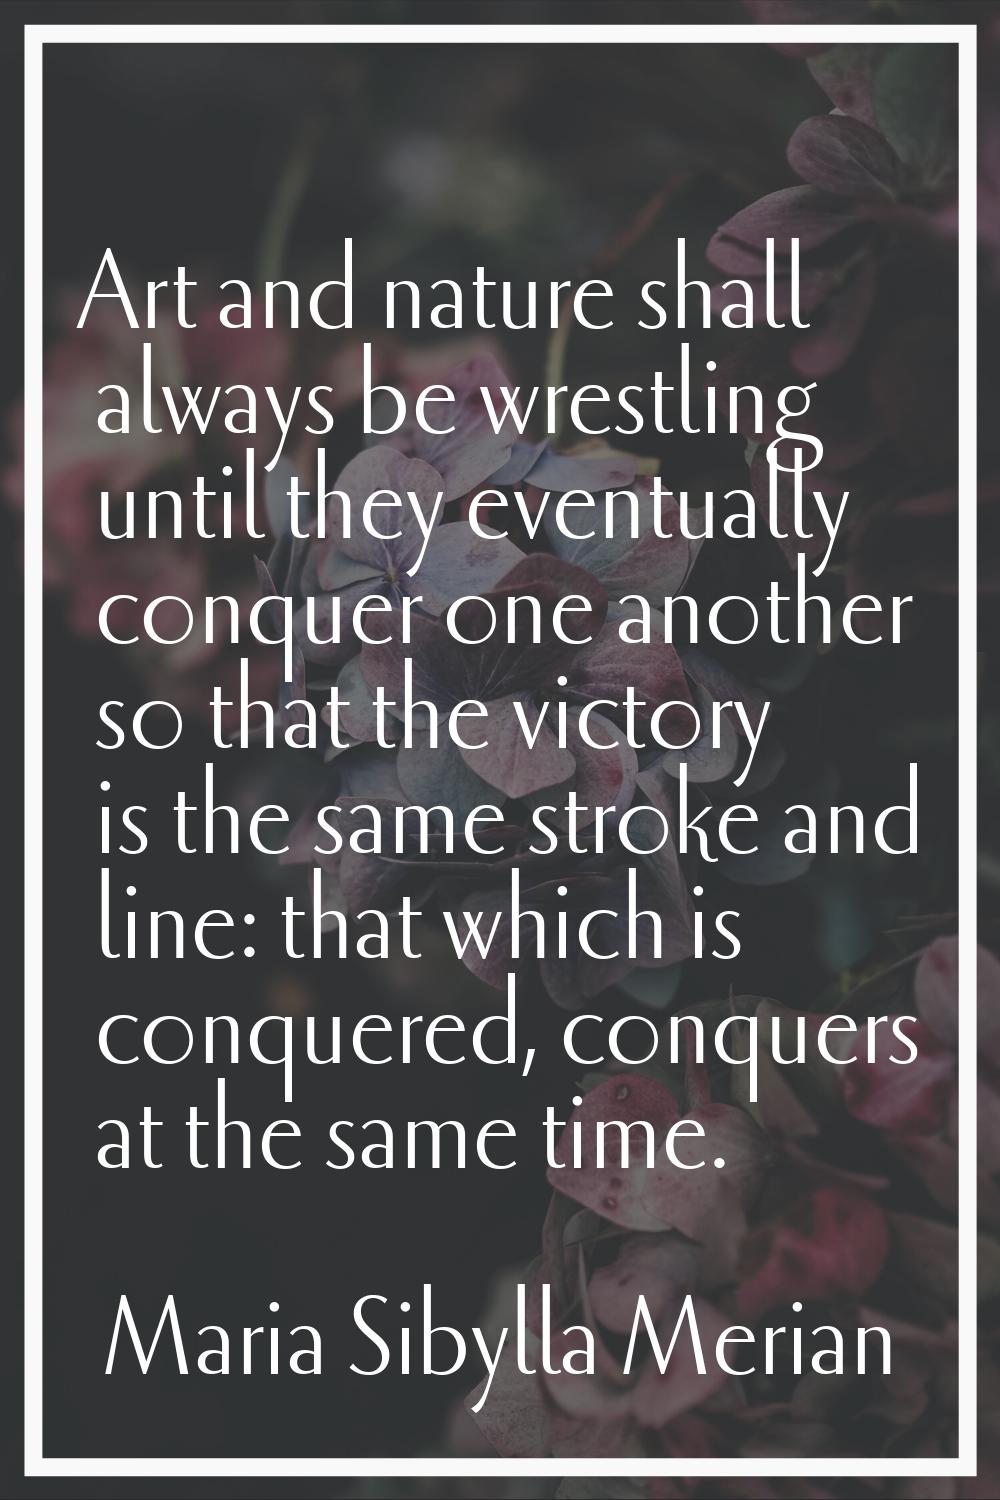 Art and nature shall always be wrestling until they eventually conquer one another so that the vict